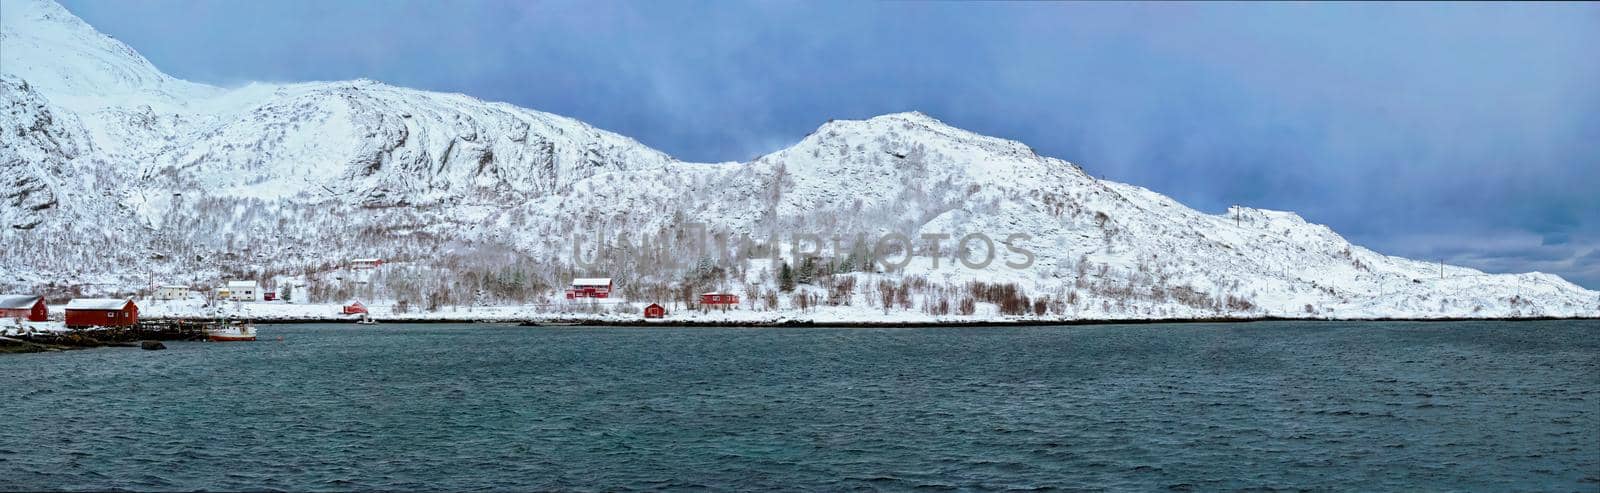 Panorama of Norwegian fjord with traditional red rorbu houses on fjord shore in snow in winter. Lofoten islands, Norway